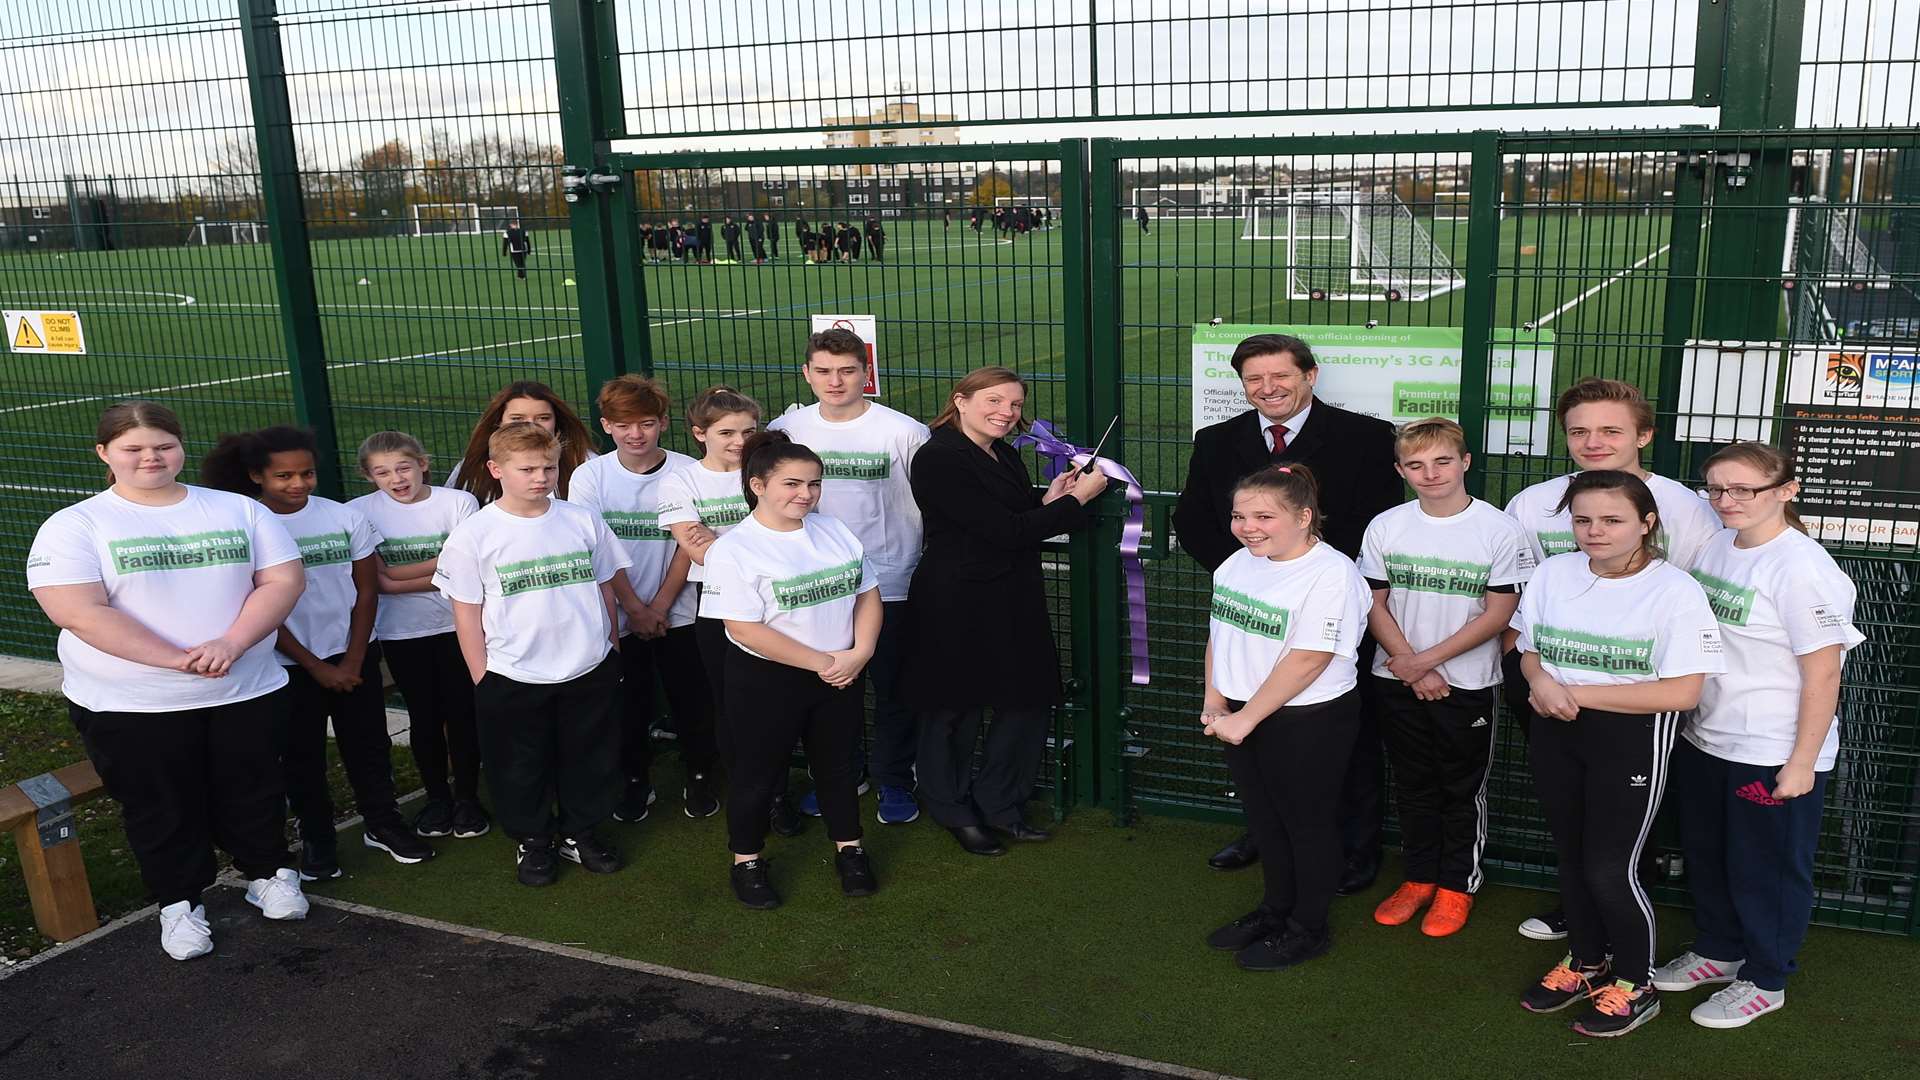 Sports minister and Chatham MP Tracey Crouch and the Football Foundation's chief executive officer, Paul Thorogood, officially opening The Victory Academy's all weather pitch